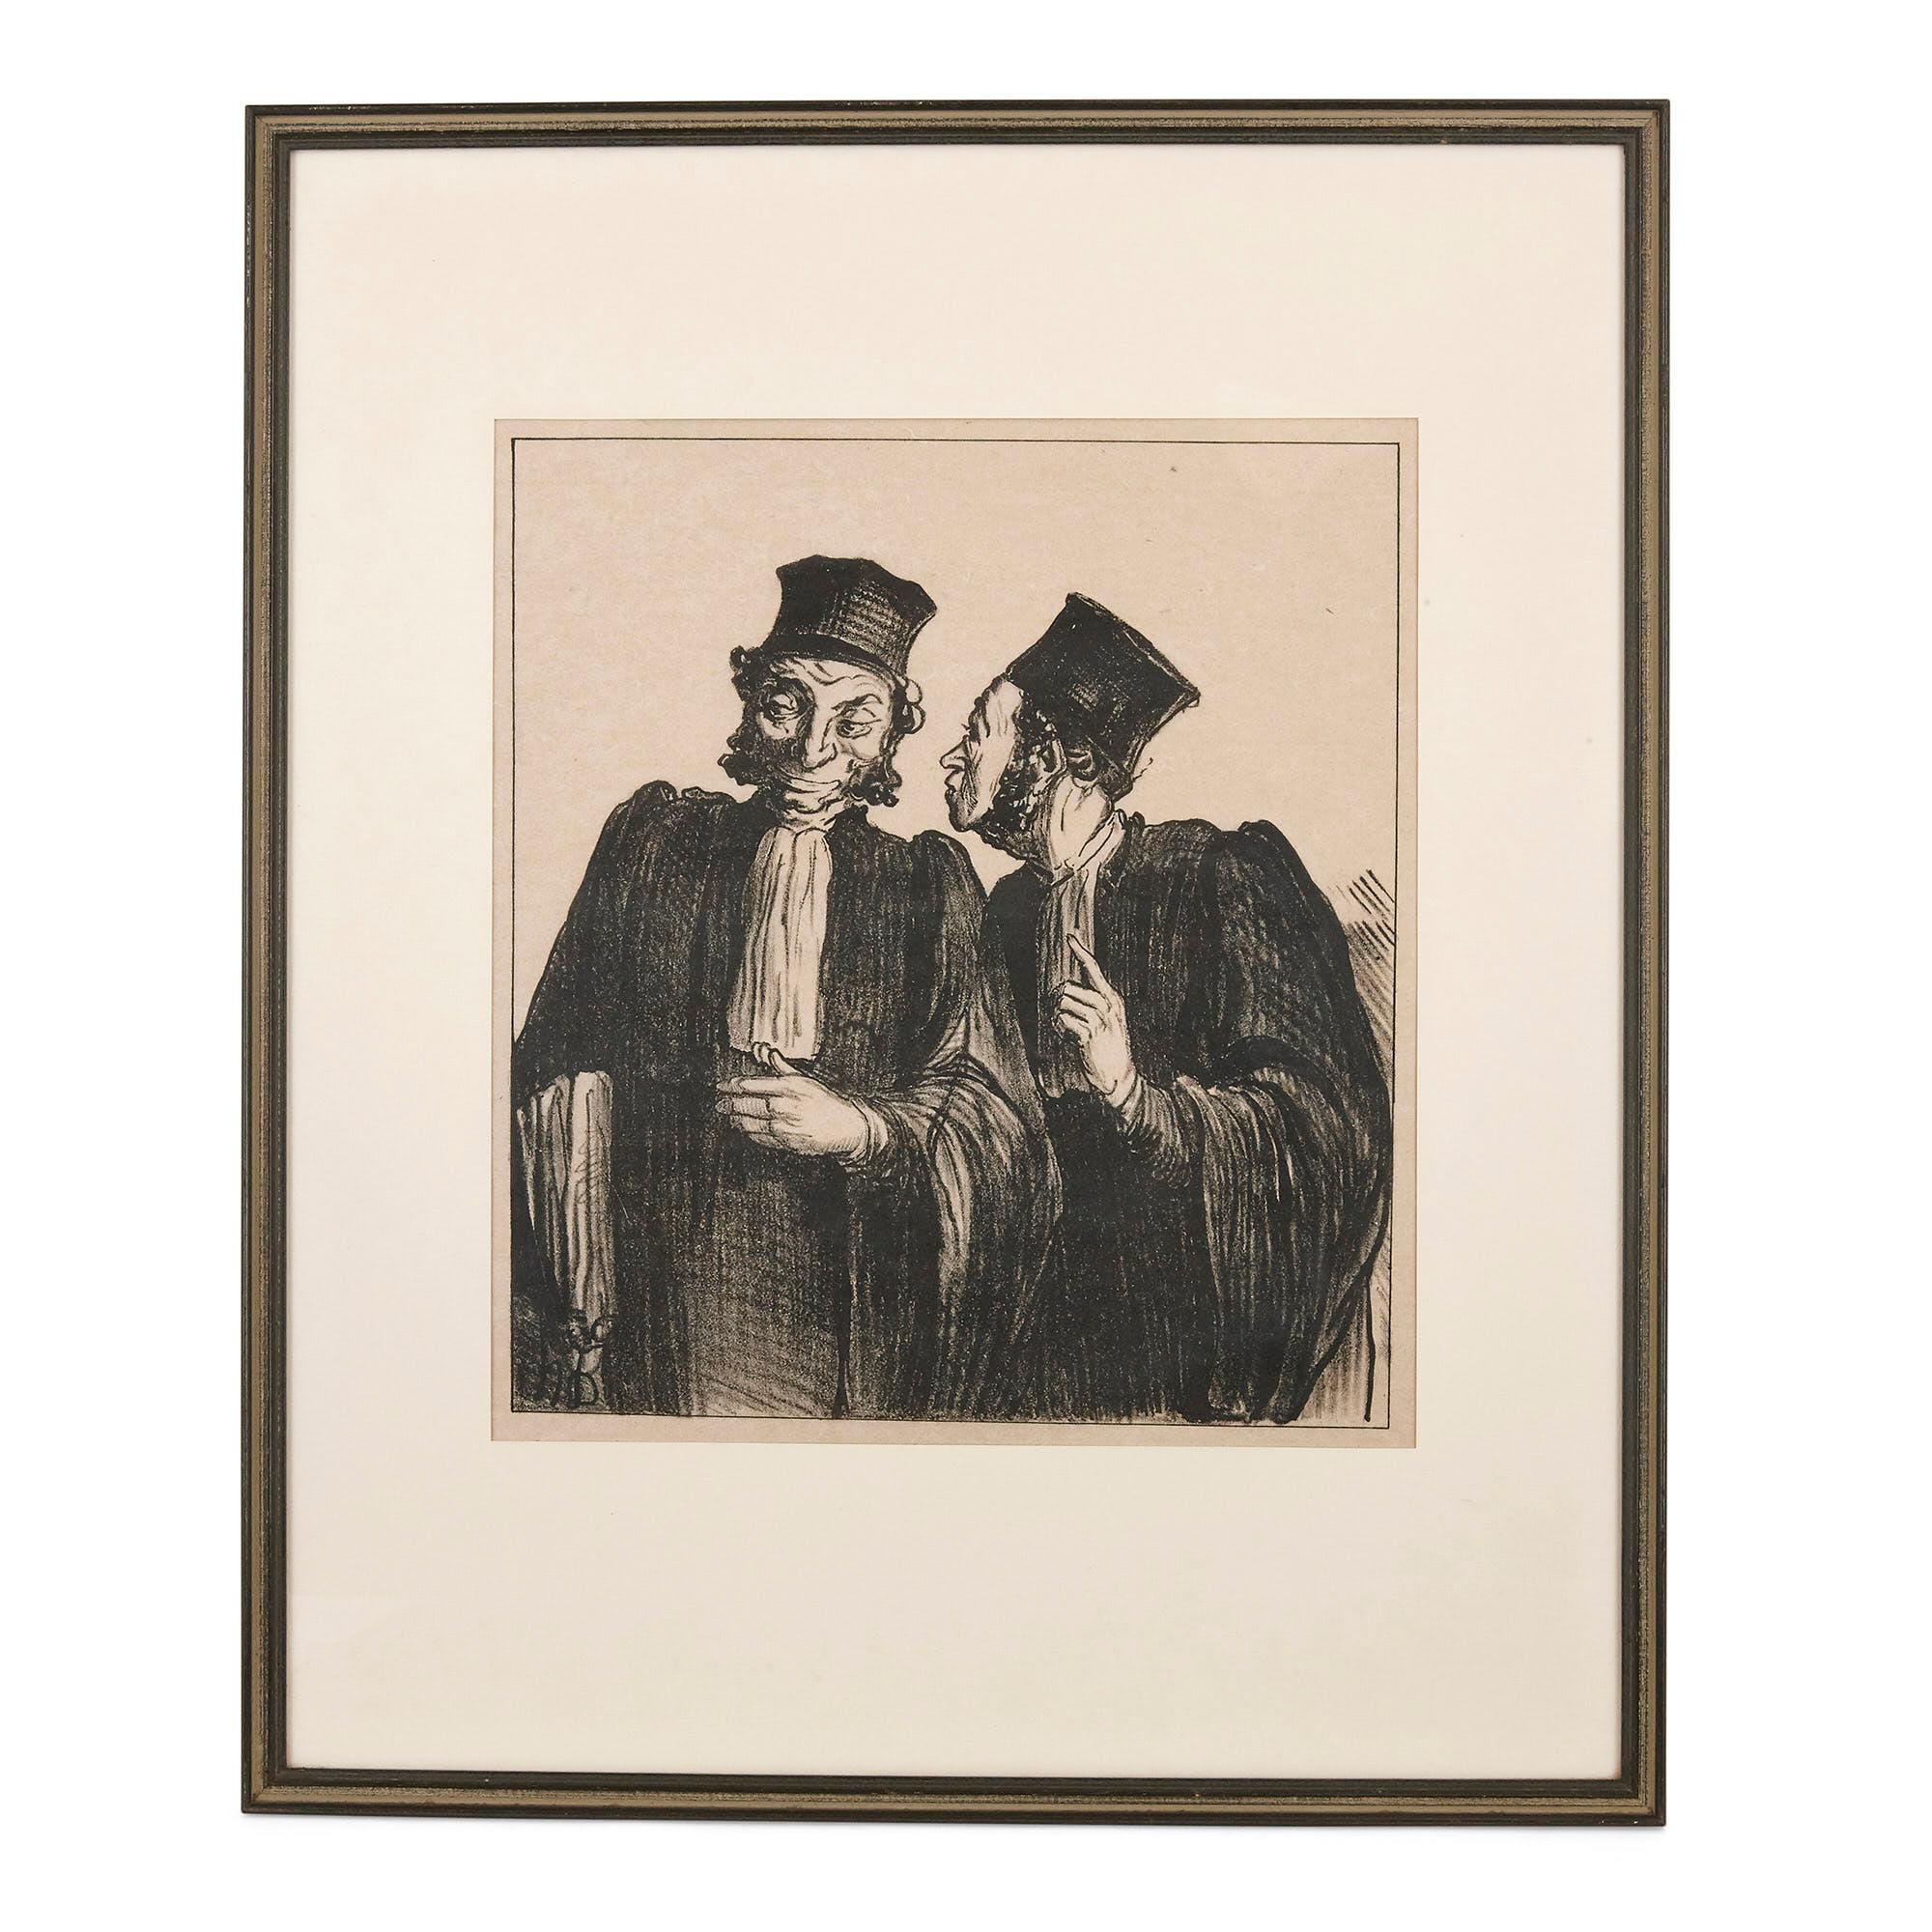 Honoré Daumier Print - Two lawyers from 'Croquis Parisiens'